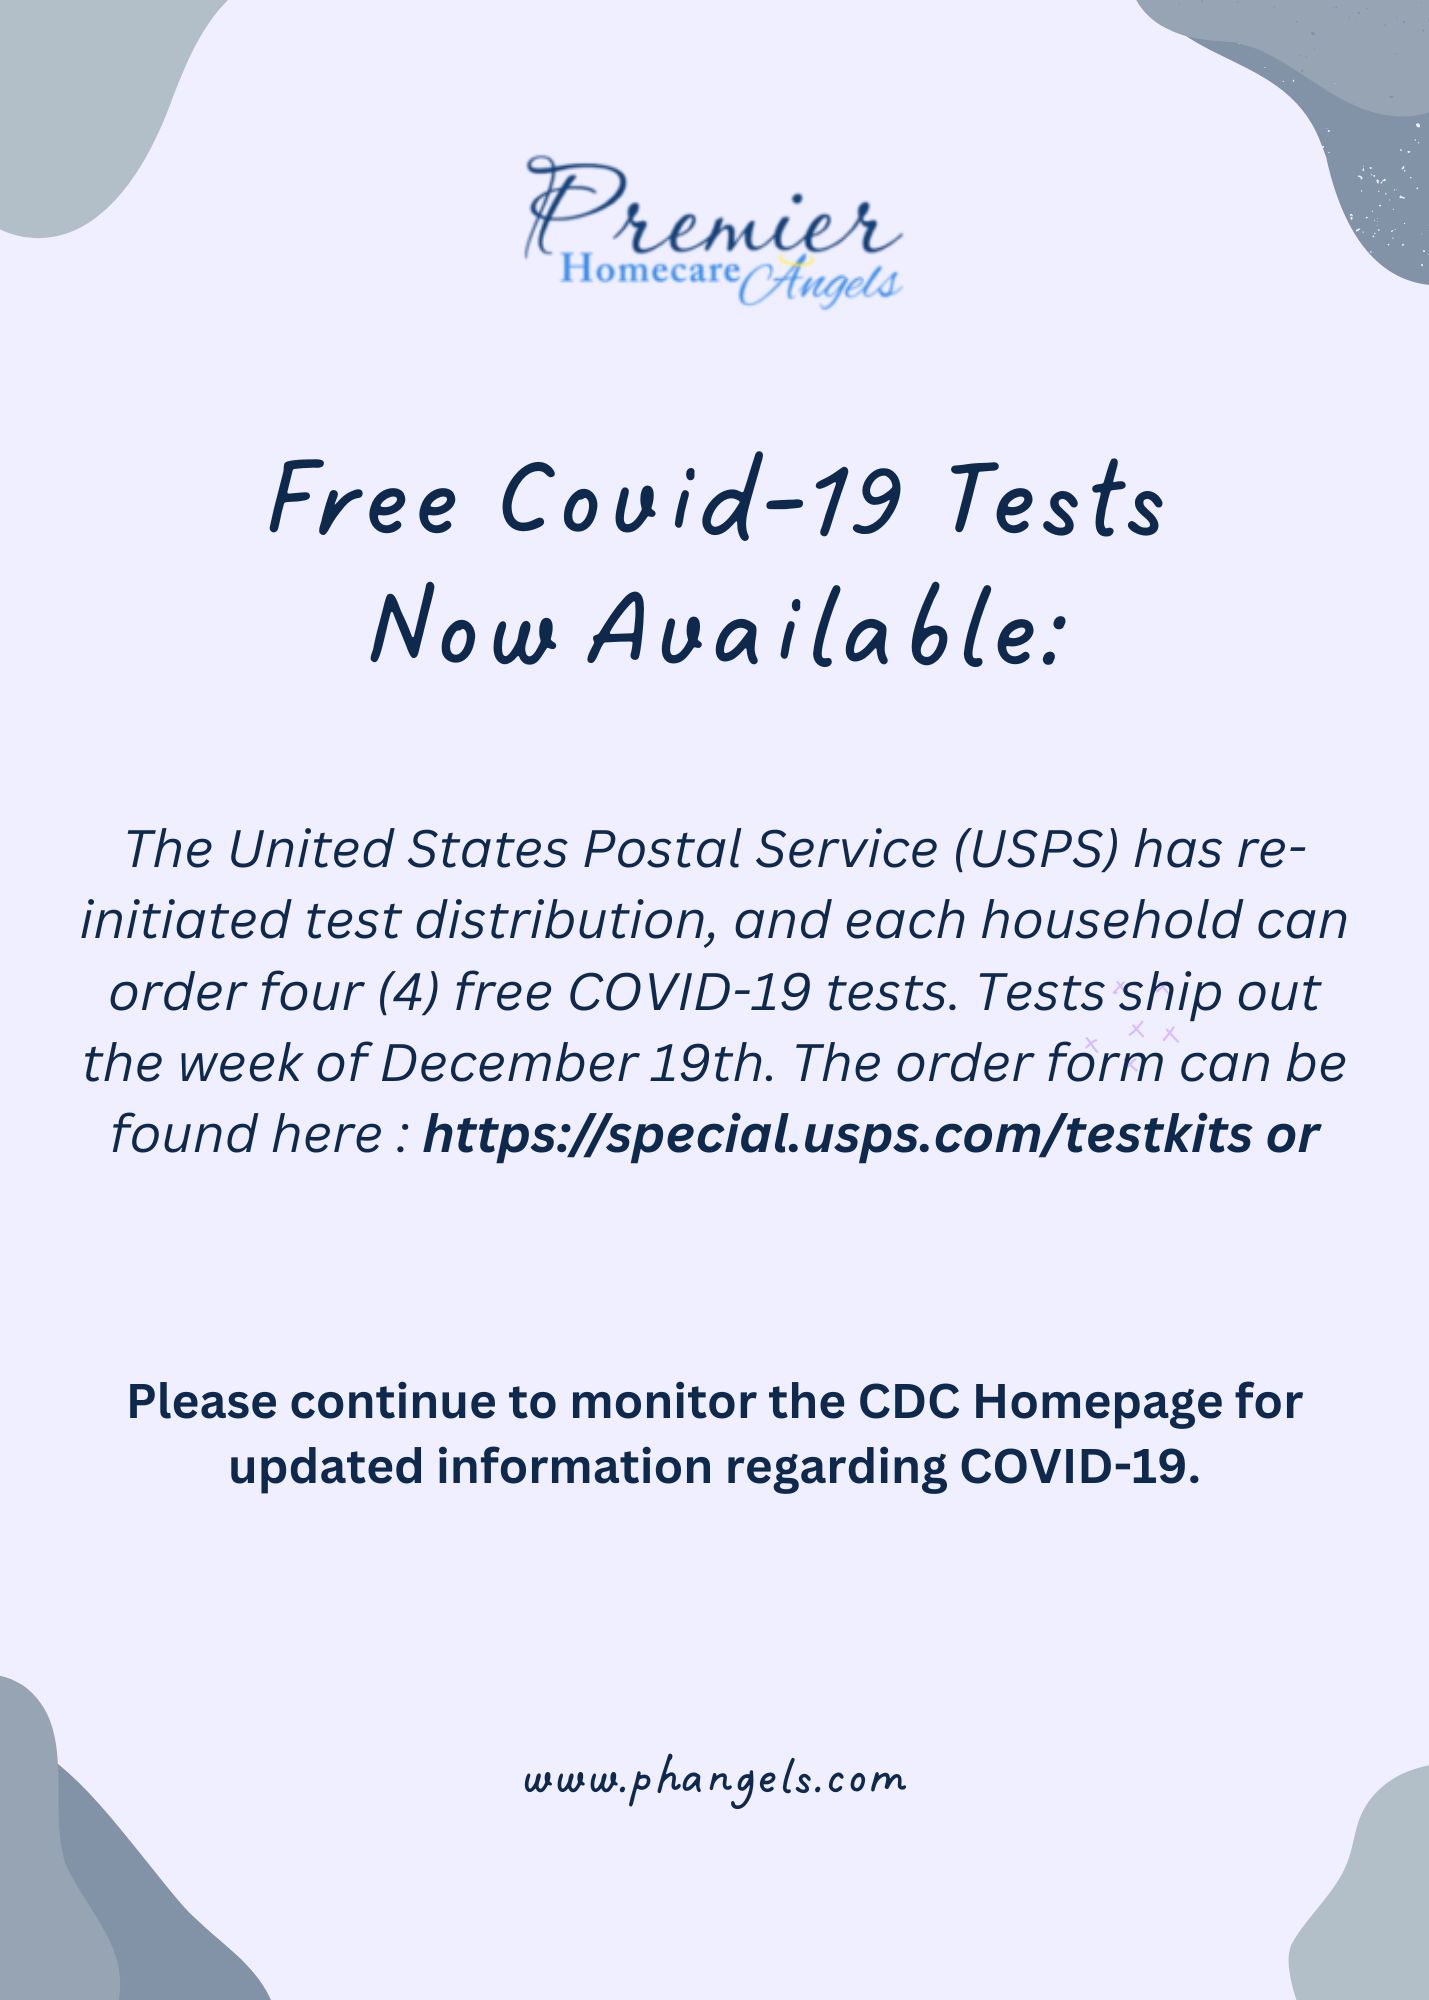 📌Free Covid-19 Tests are now available.